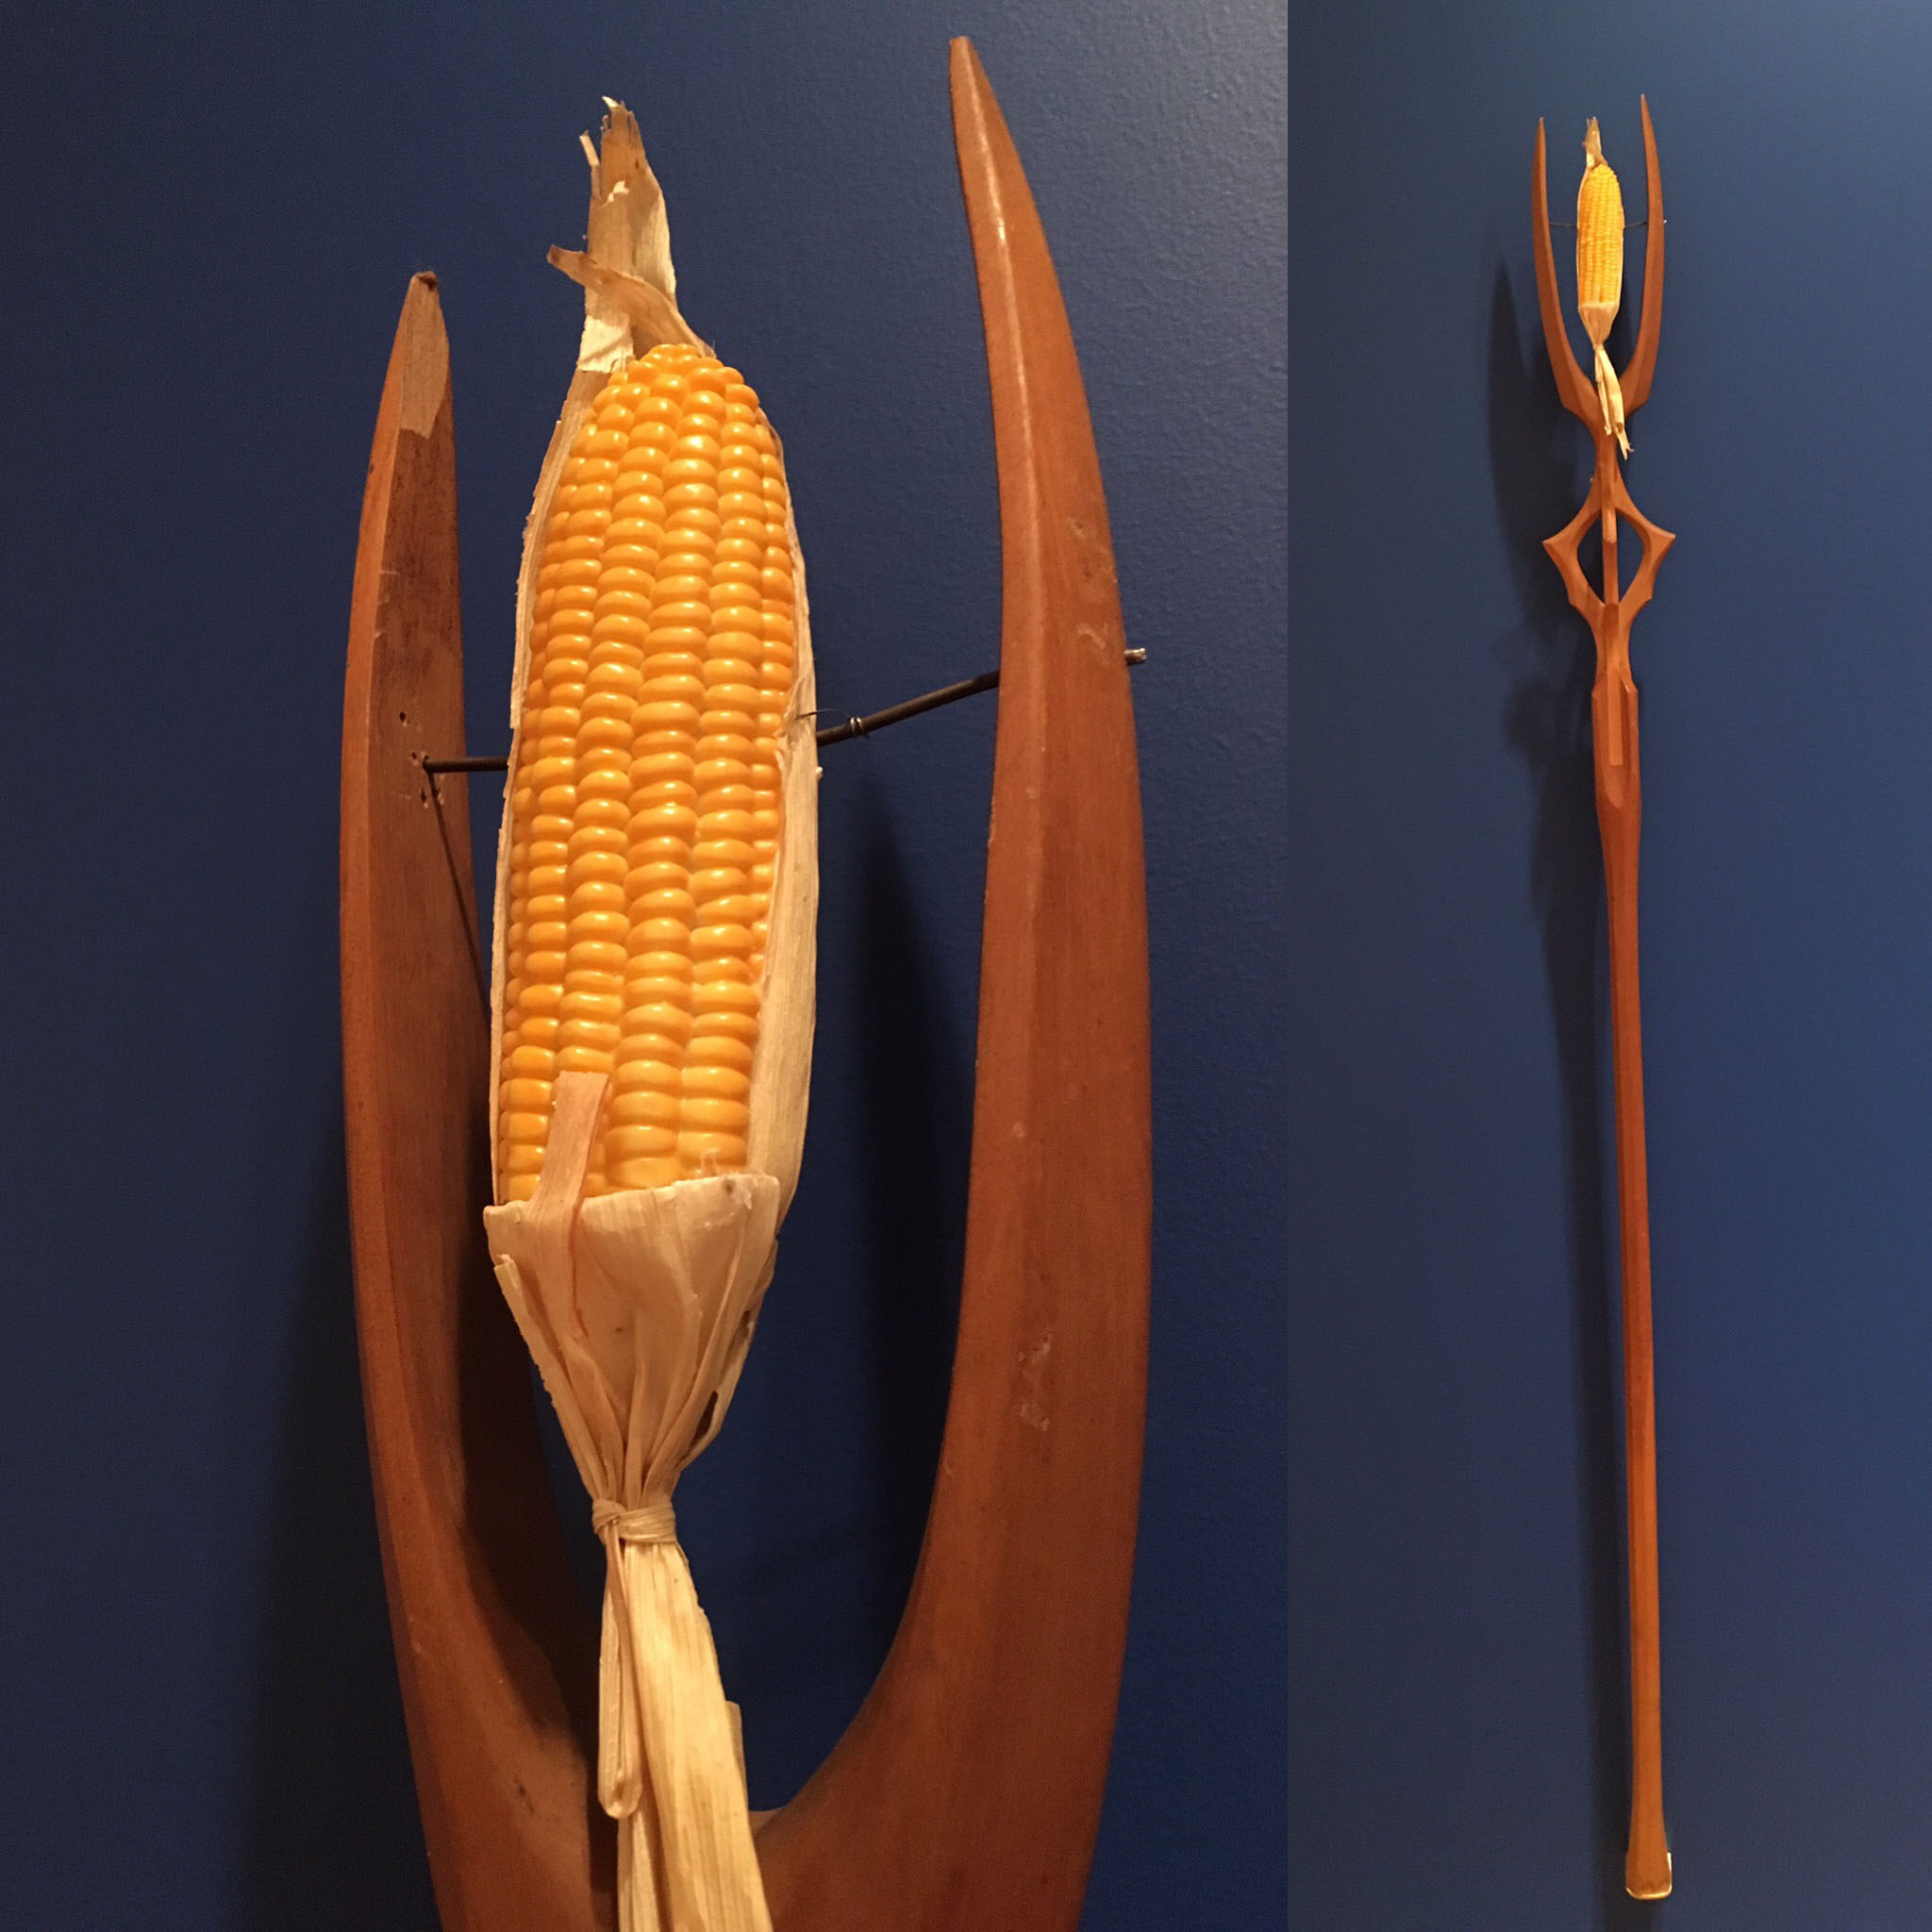 A forked wooden staff adorned with an ear of corn at the tip